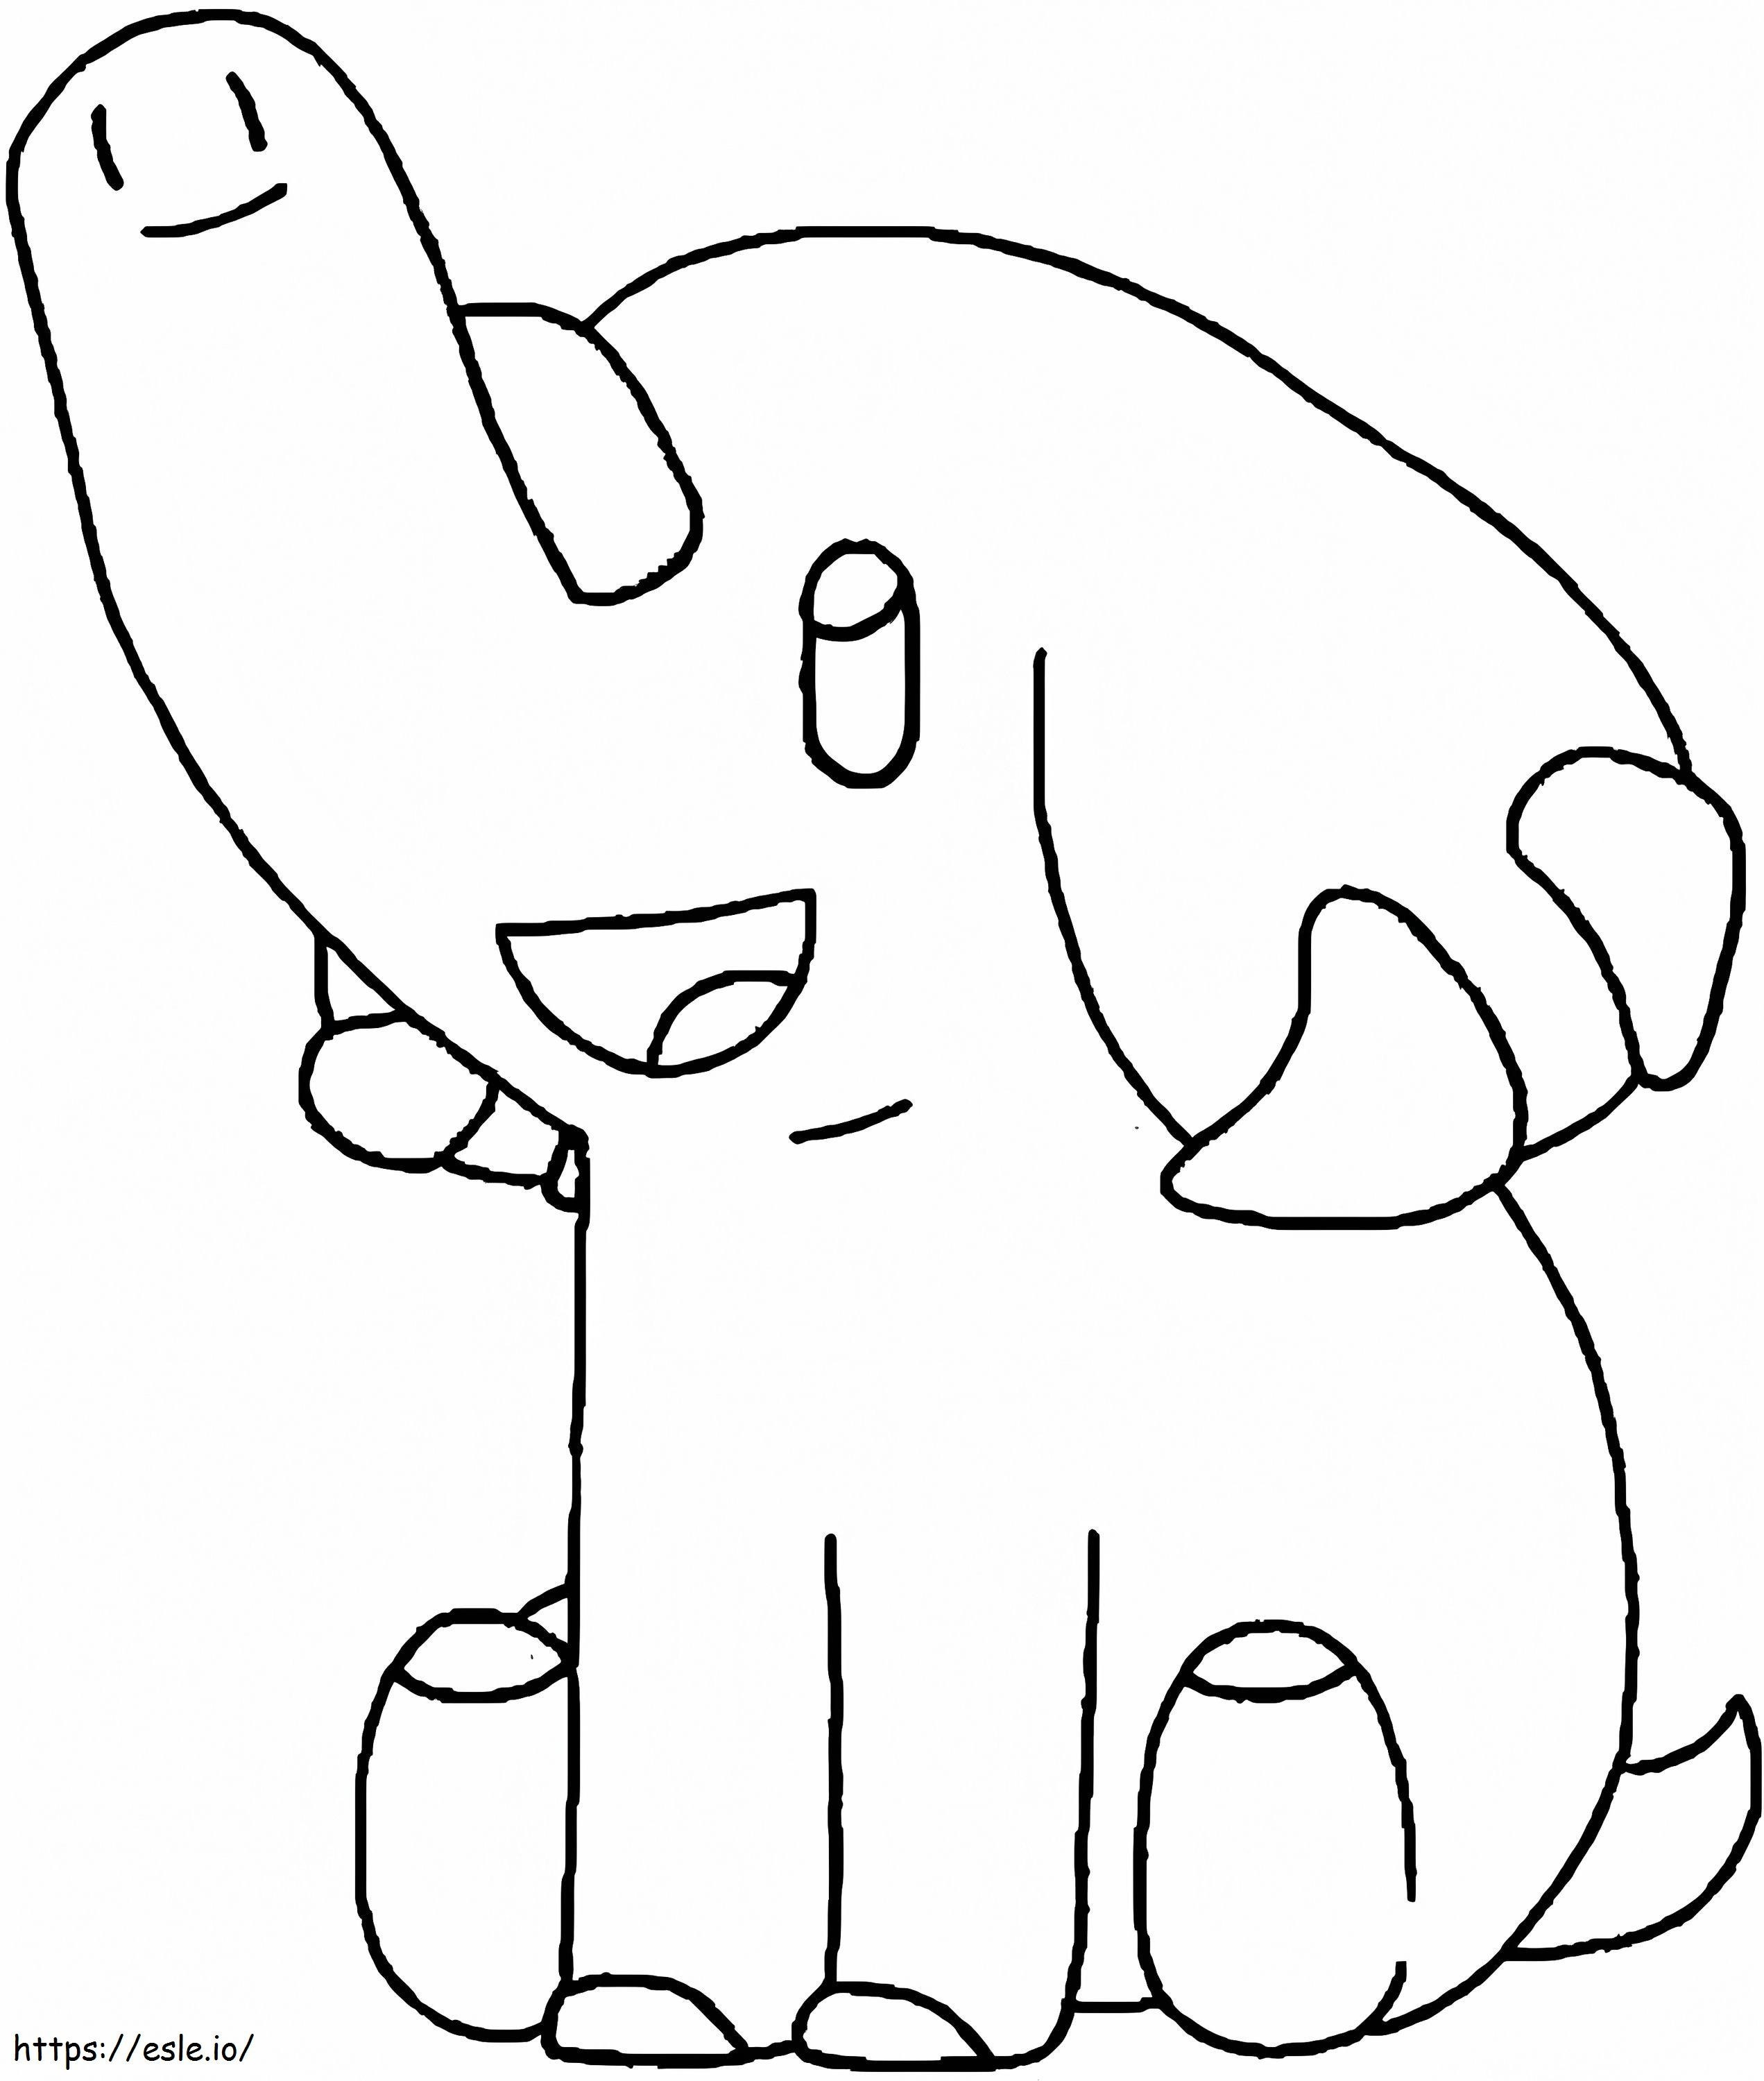 Happy Phanpy coloring page